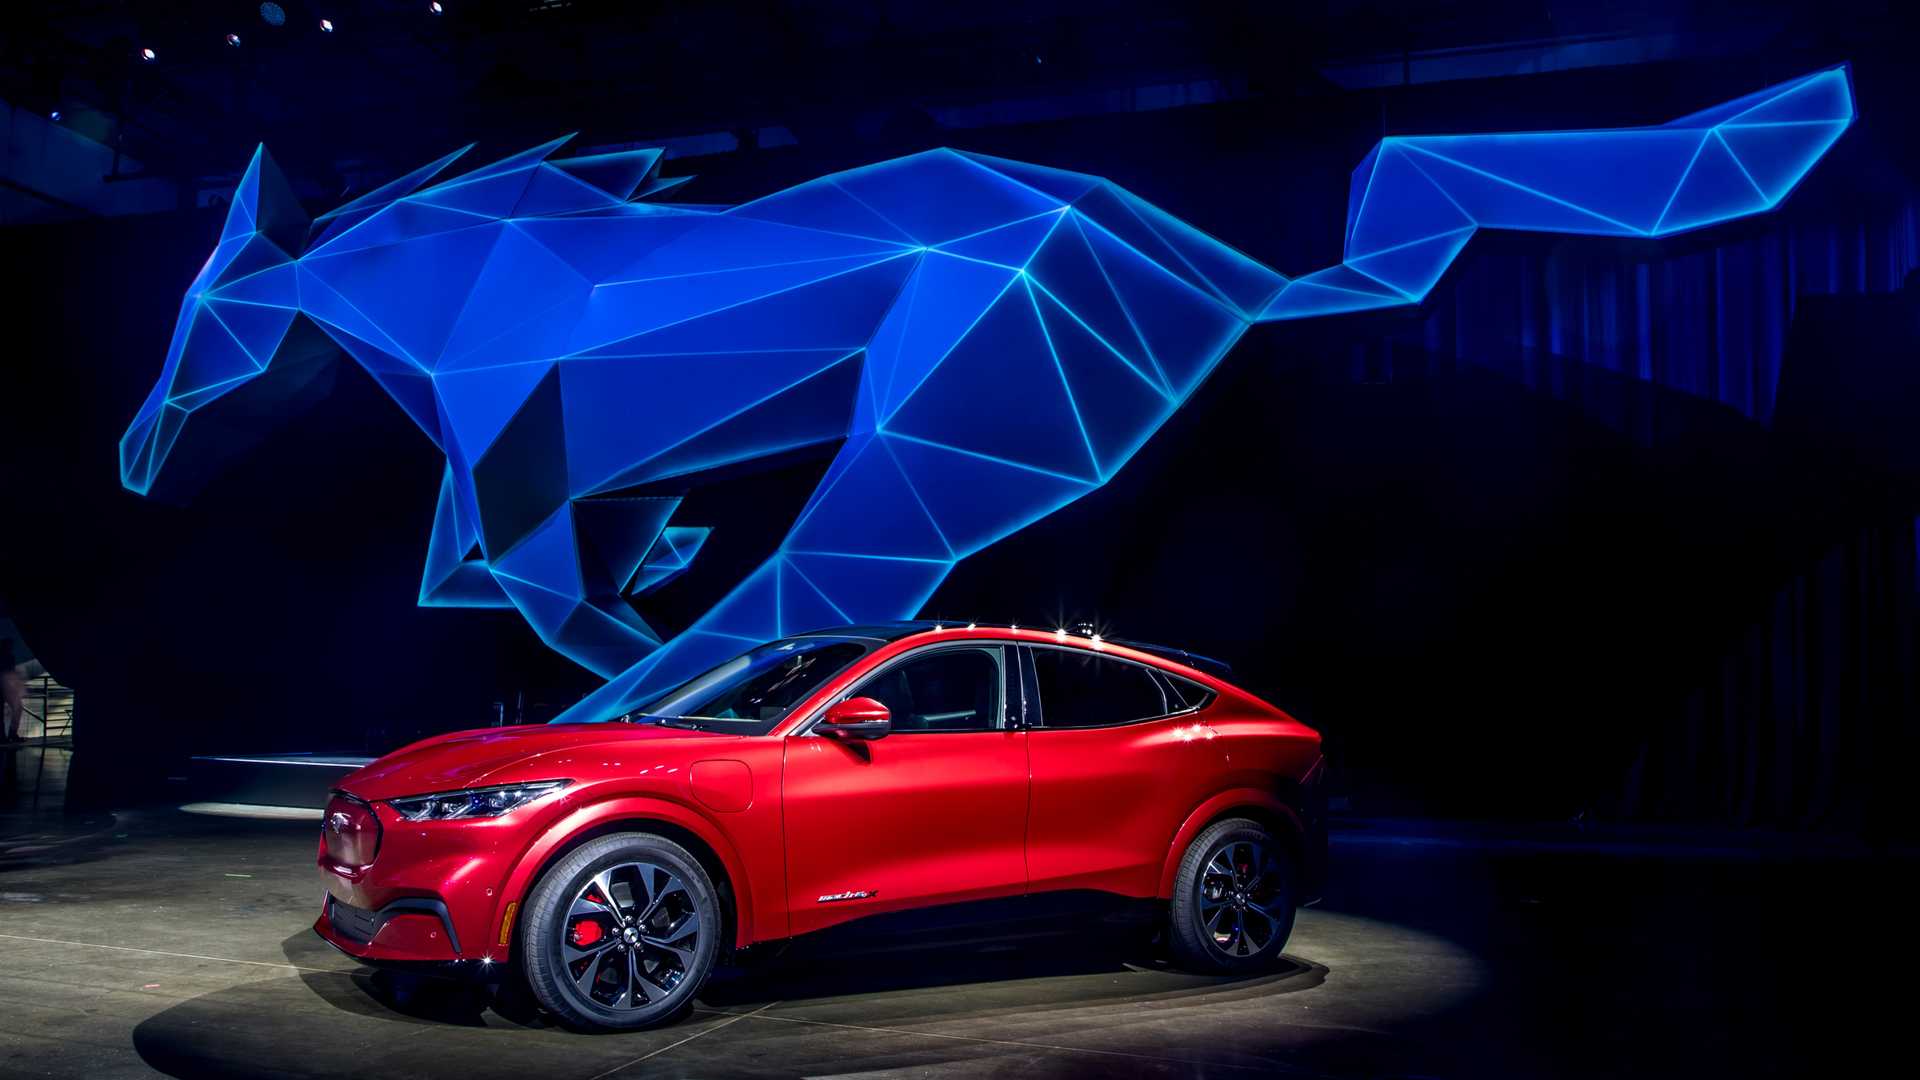 UPDATE: Ford Mustang Mach E Electric CUV Debuts With Up To 300 Miles Of Range